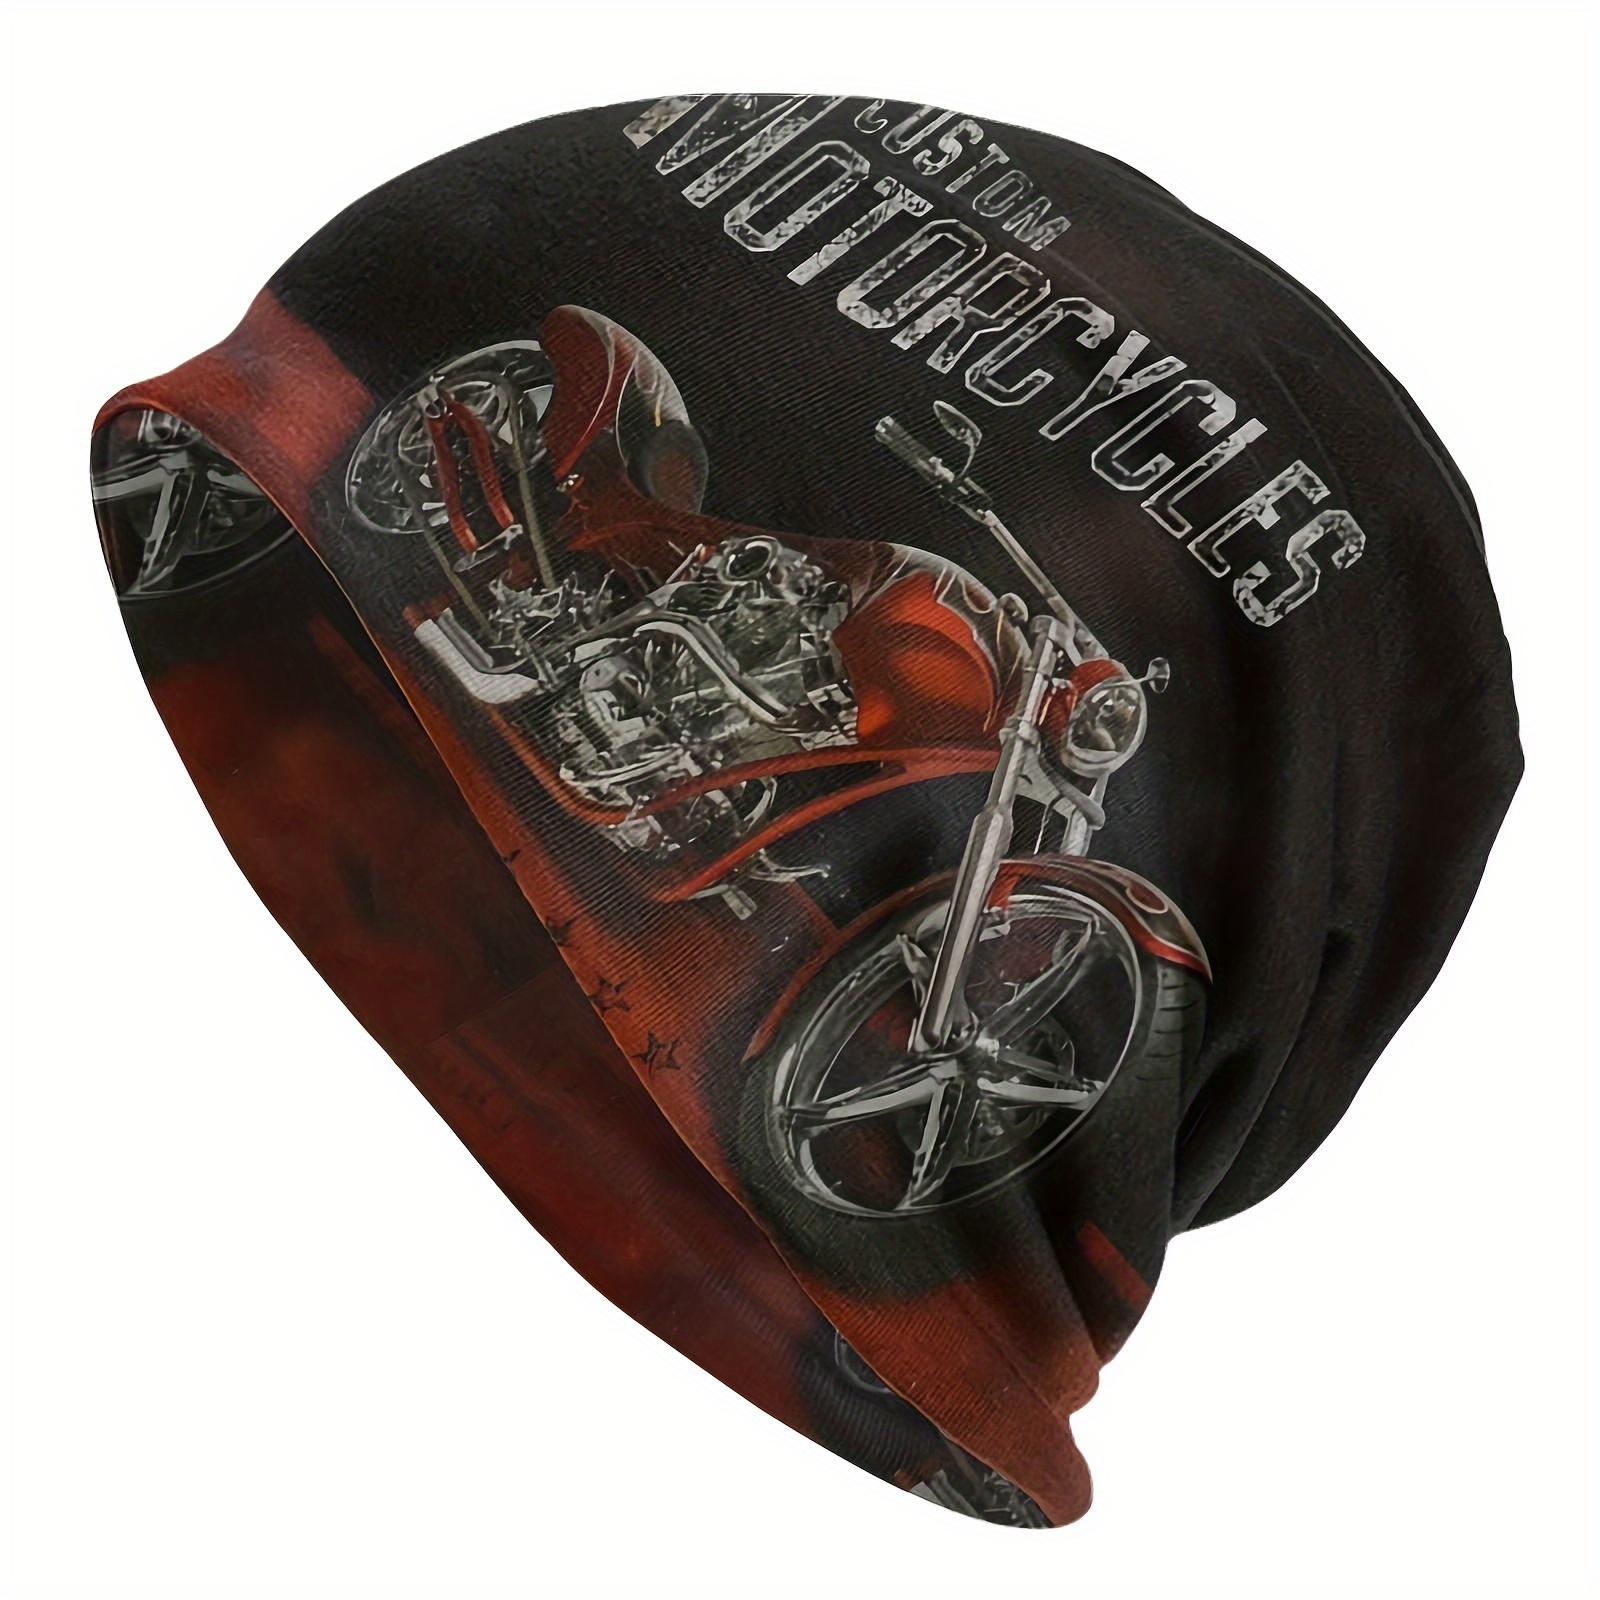 

Retro Design Motorcycle Brimless Hat For Men And Women - Thin Beanies Caps, Ideal Choice For Gifts